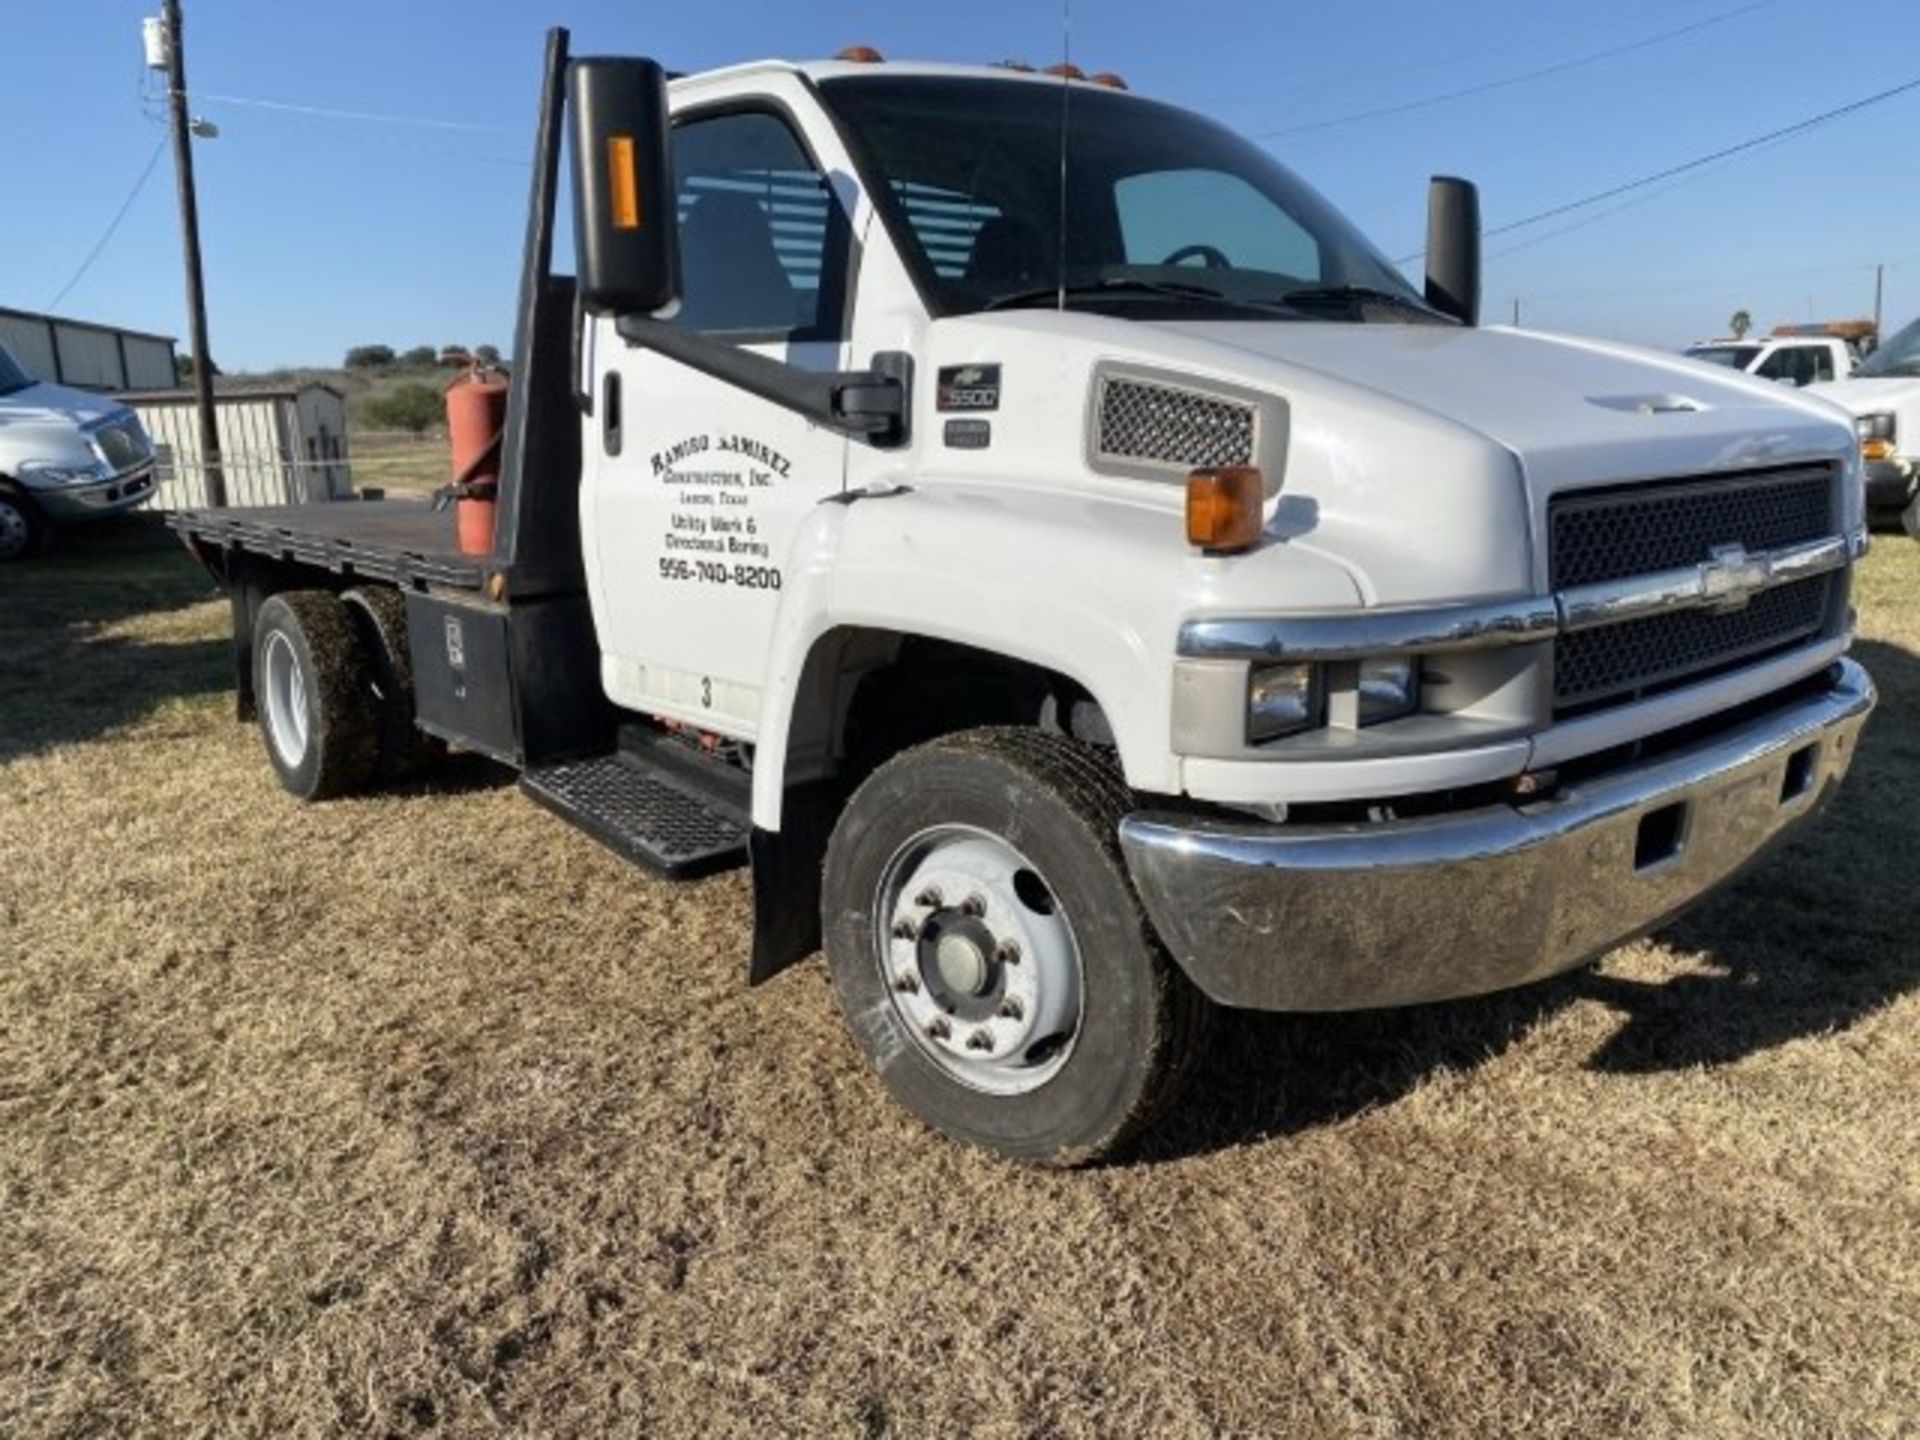 2003 Chevrolet C5500 Flatbed VIN: 1GBE5E1153F503413 Odometer States: 20314 - Image 2 of 6